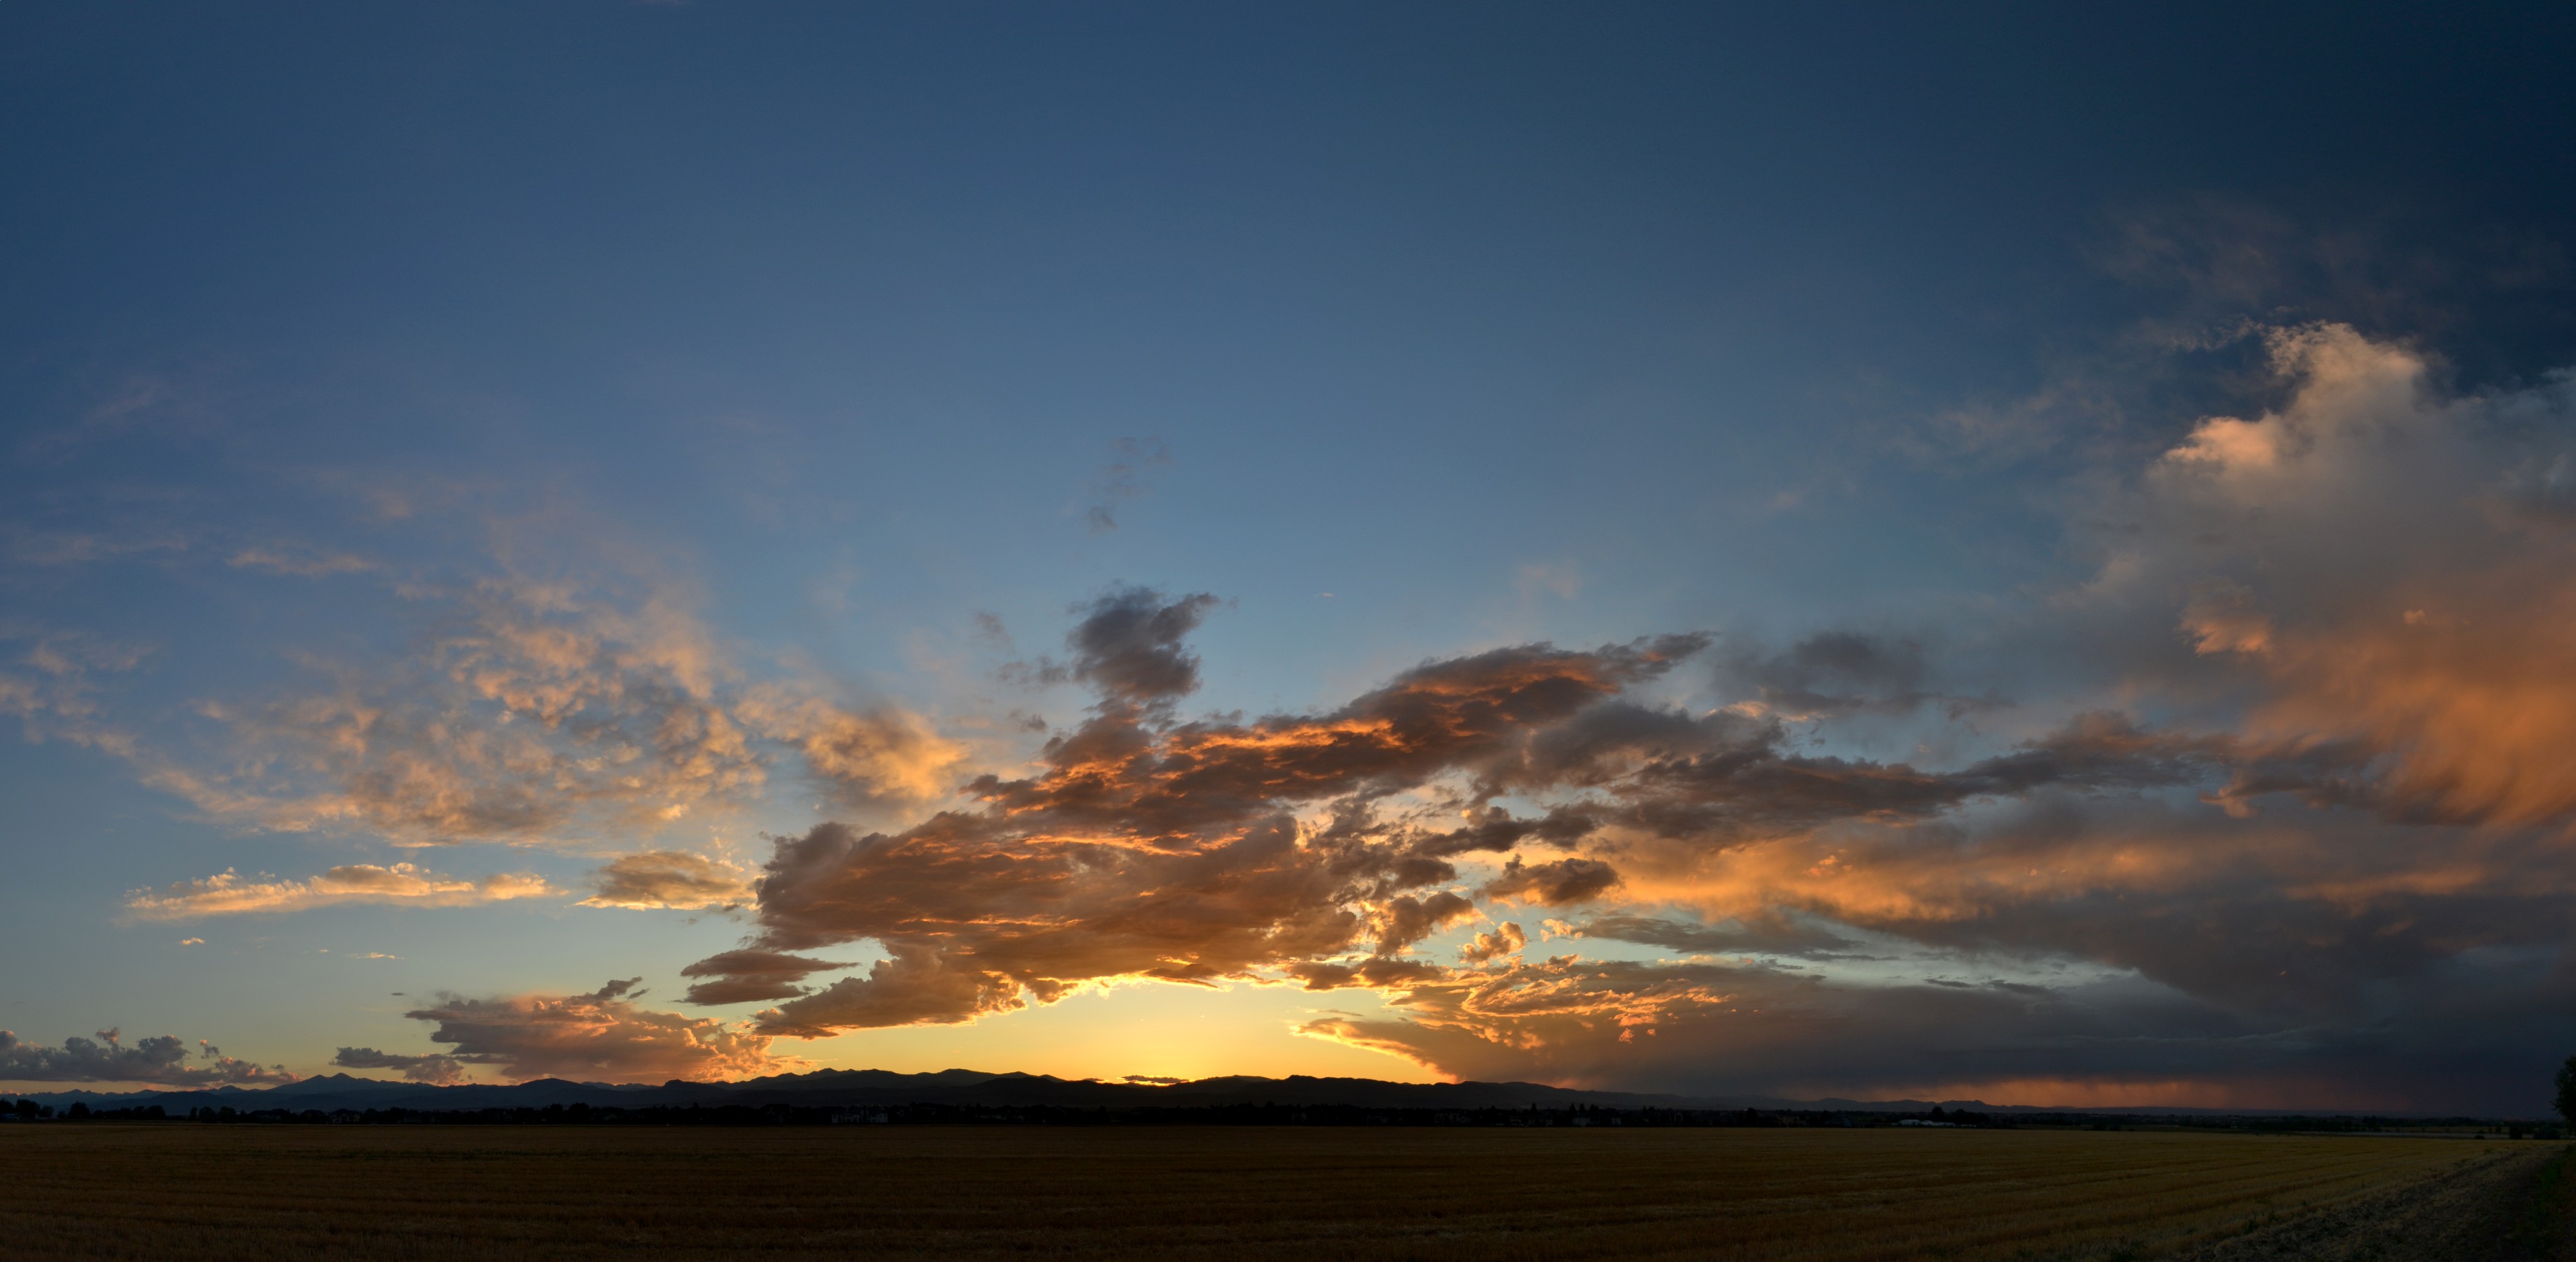 Vibrant Sunset Panoramic Clouds, 2011-08-16 - Sunsets | Colorado ...